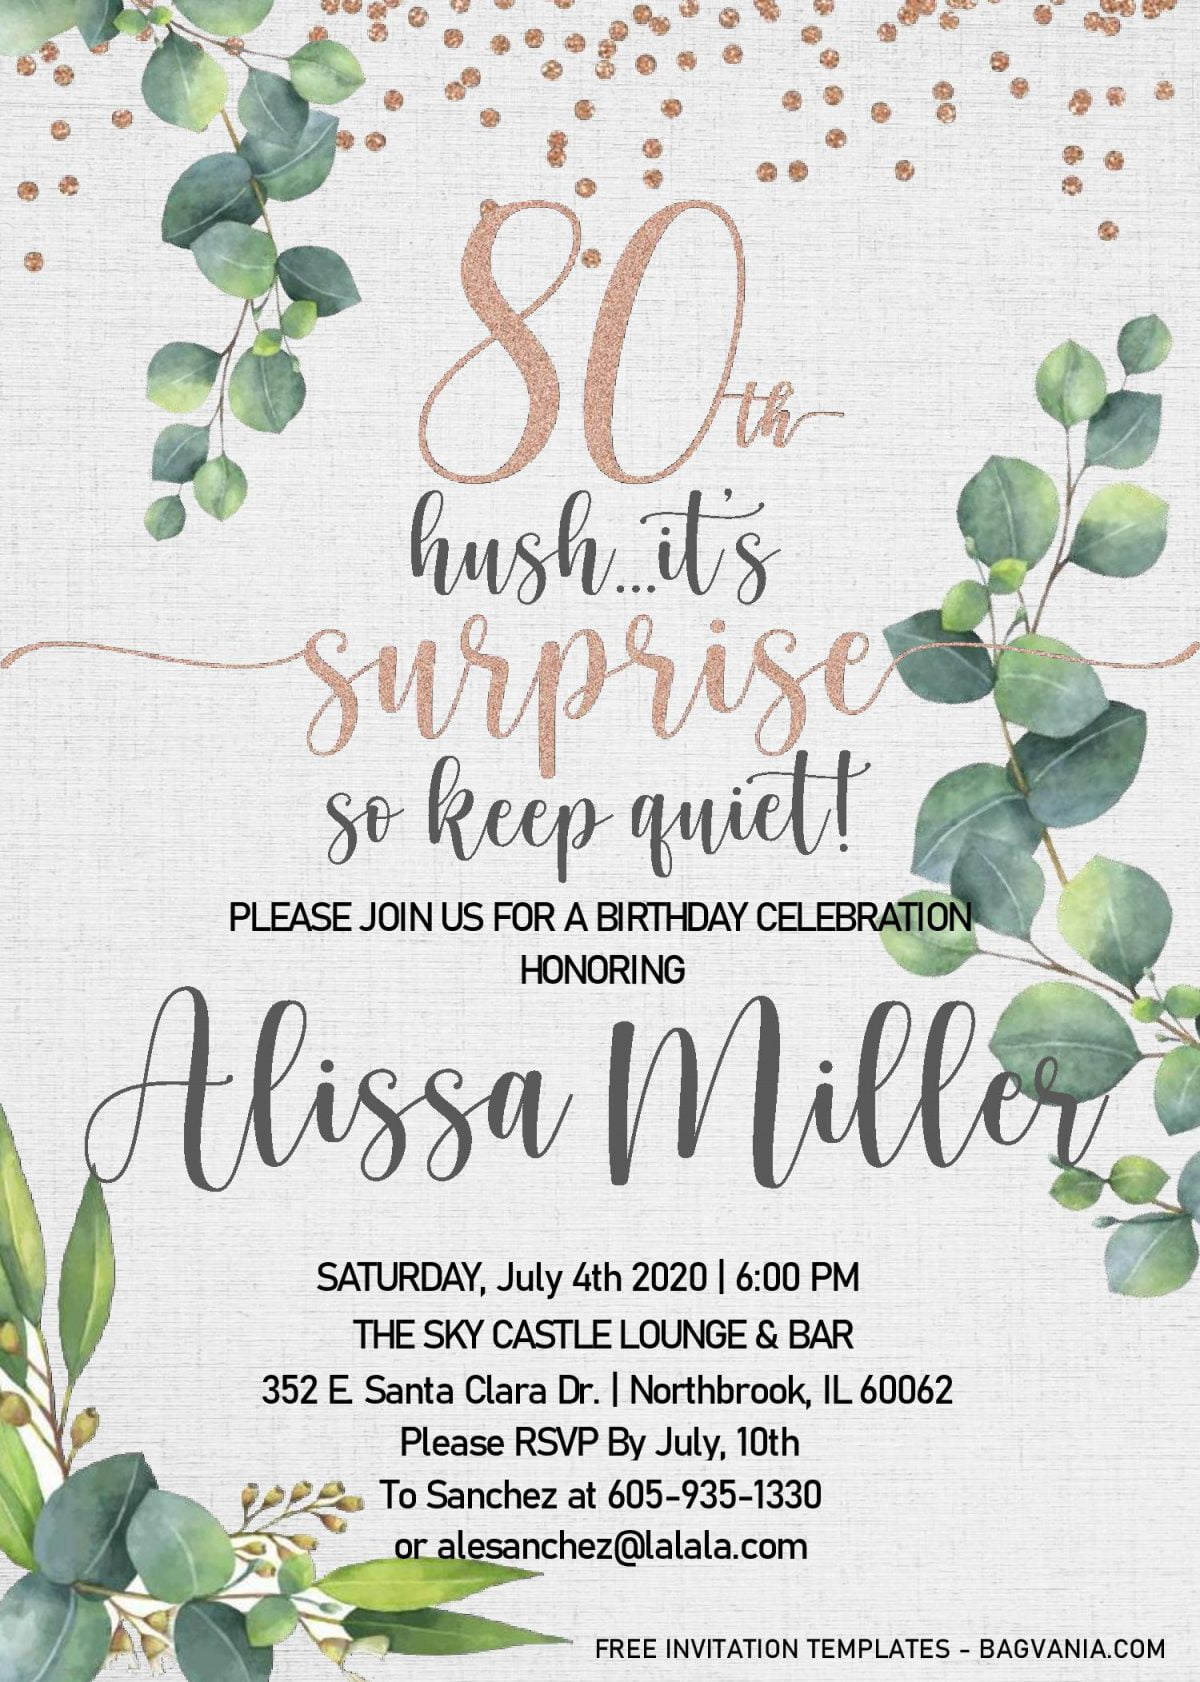 Floral 80th Birthday Invitation Templates - Editable With MS Word and has gorgeous eucalyptus flowers